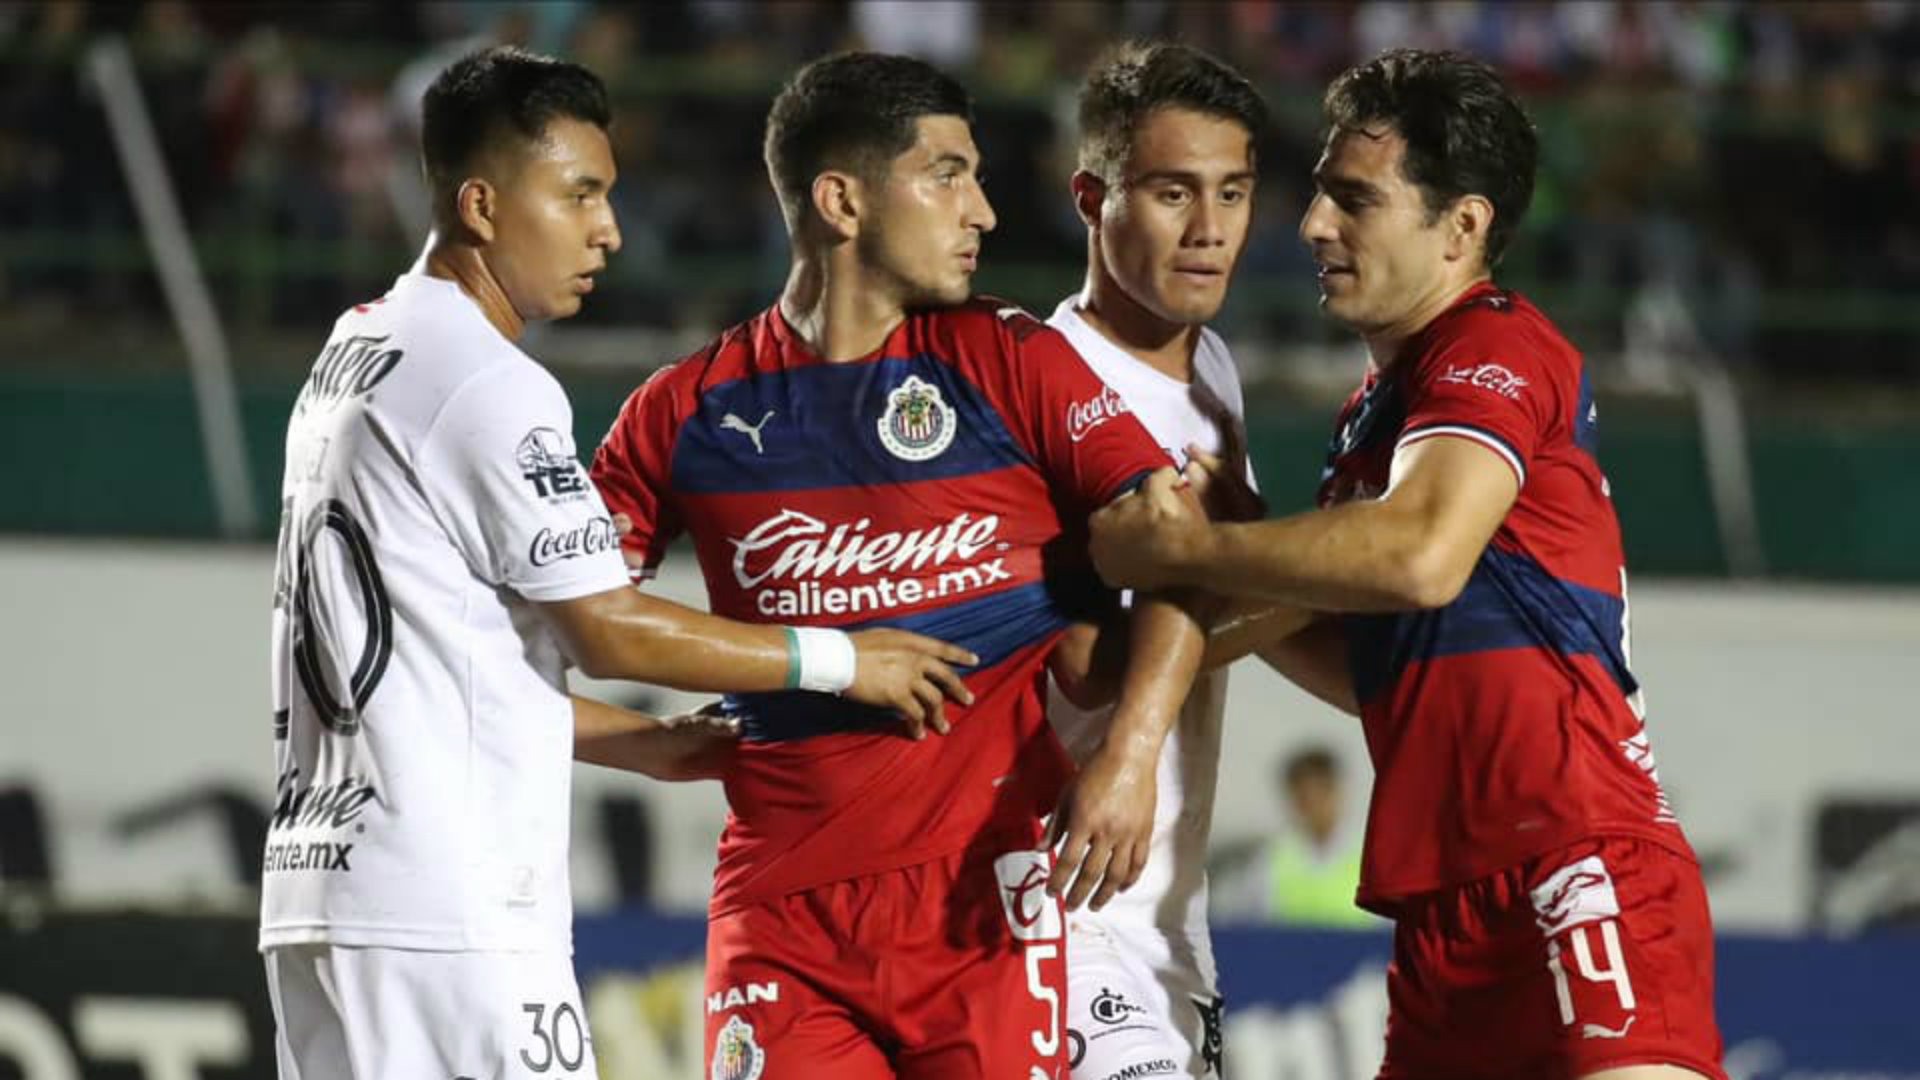 Liga Mx Preview The Five Most Intriguing Storylines Heading Into The 2020 Clausura Goal Com